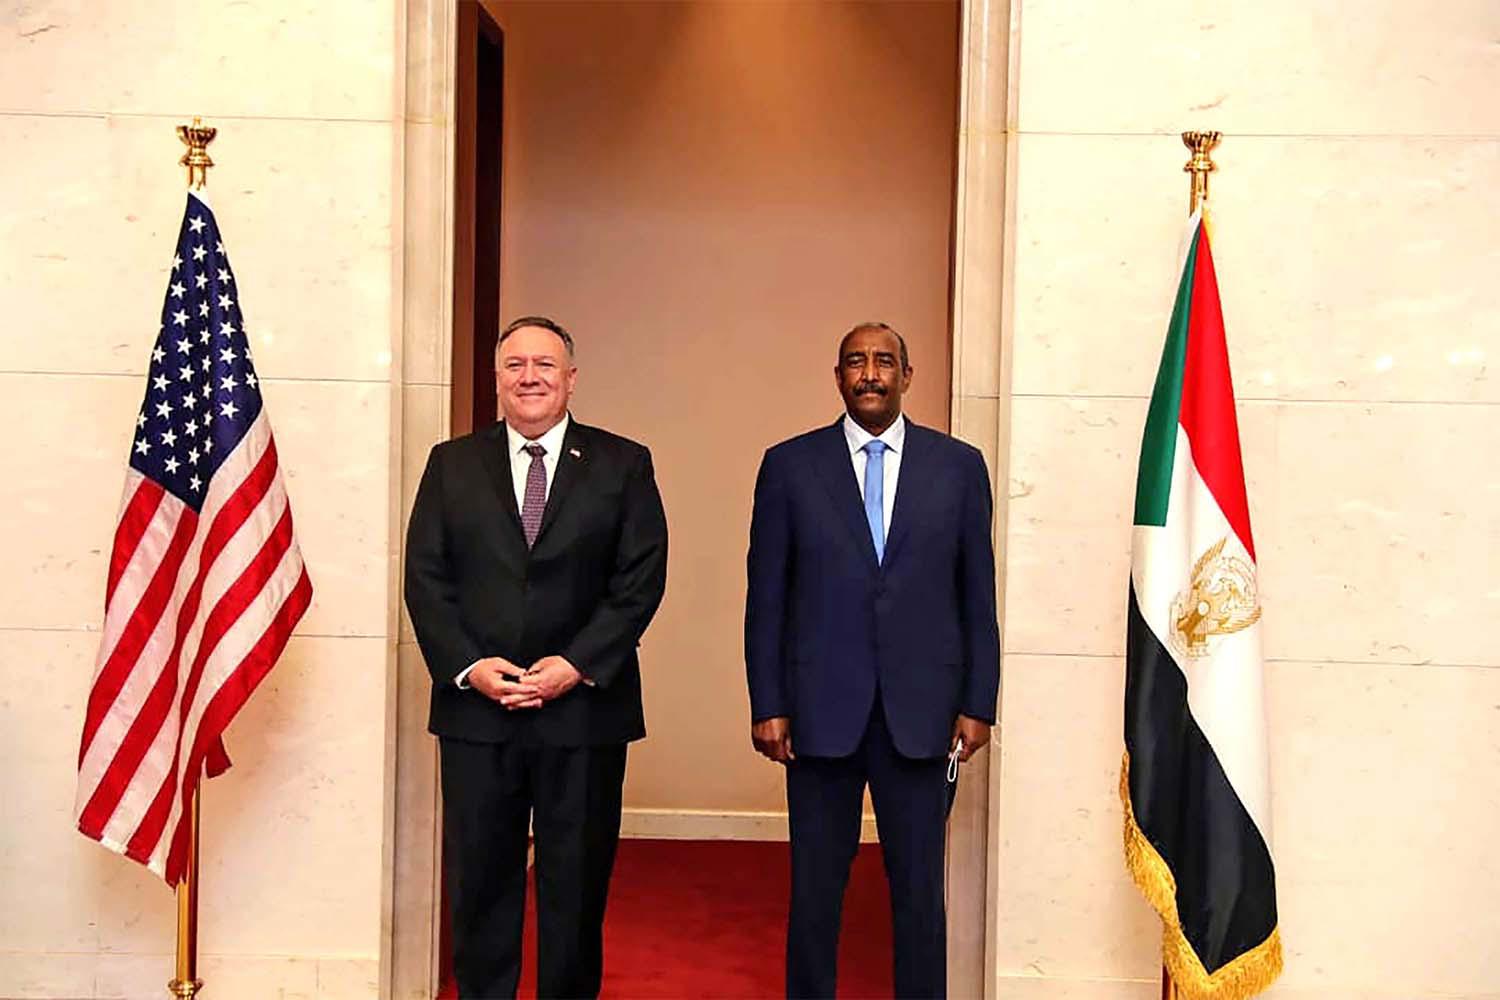 The reinstatement of sovereign immunity and the financial aid will pave the way for Sudan to normalise ties with Israel